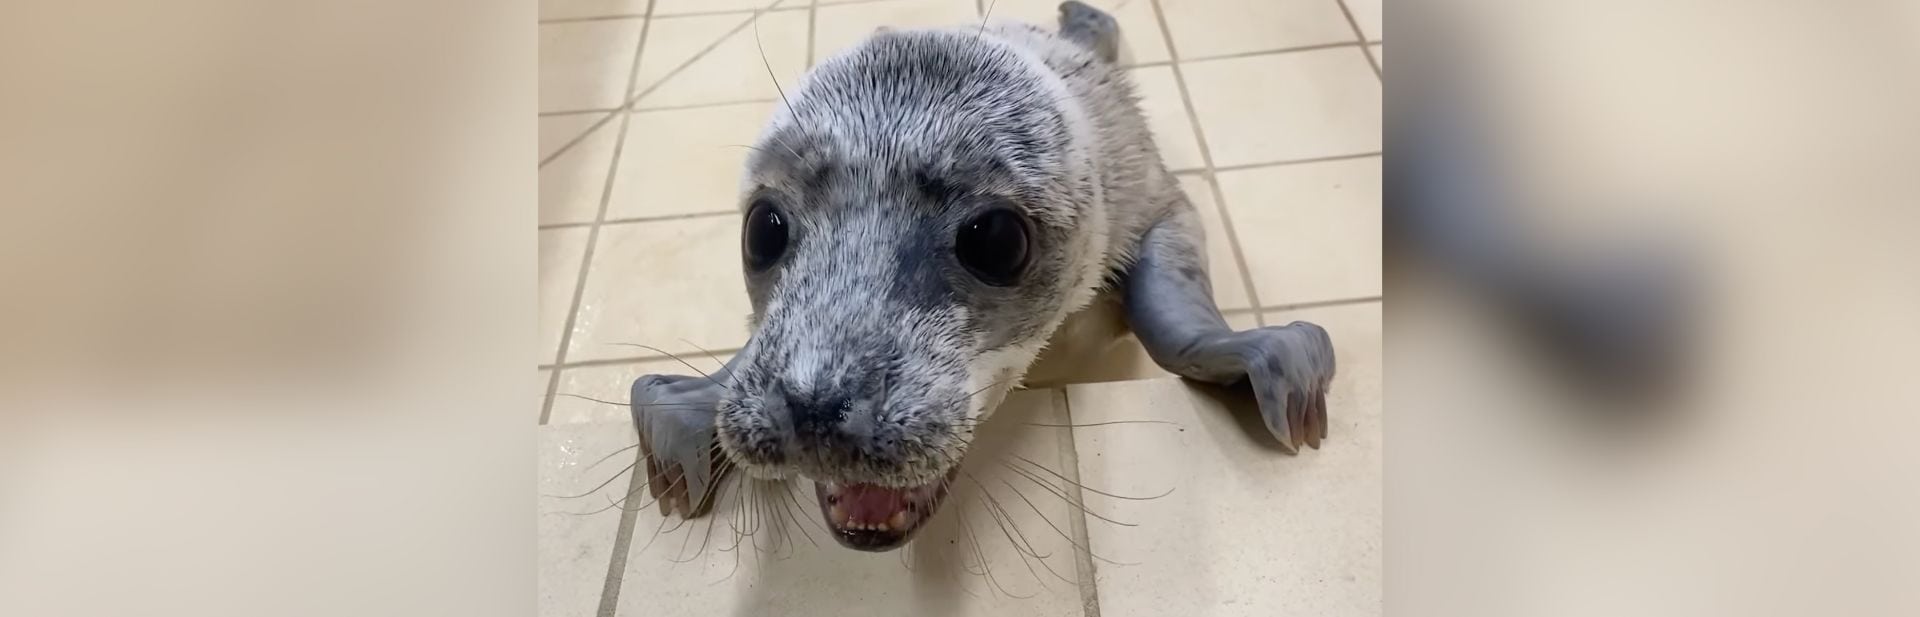 Tiny Seal’s Big Recovery Sparks Waves of Joy